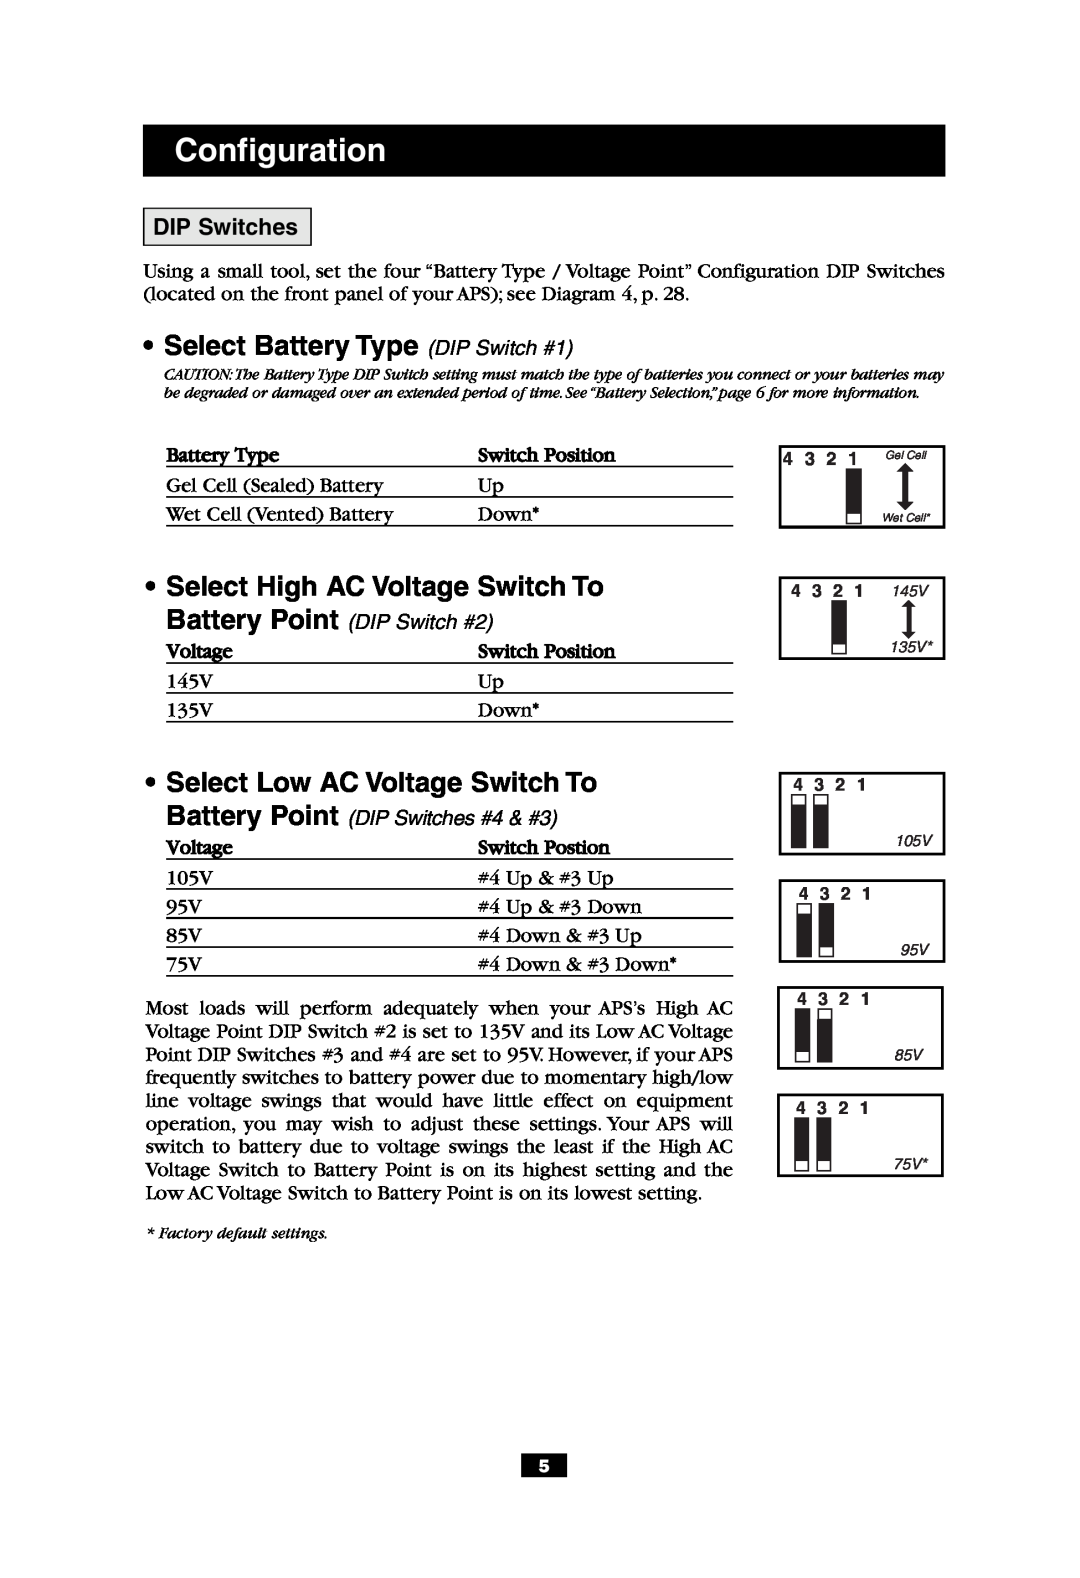 Tripp Lite APS 612 Configuration, Select Battery Type DIP Switch #1, Select High AC Voltage Switch To, DIP Switches 